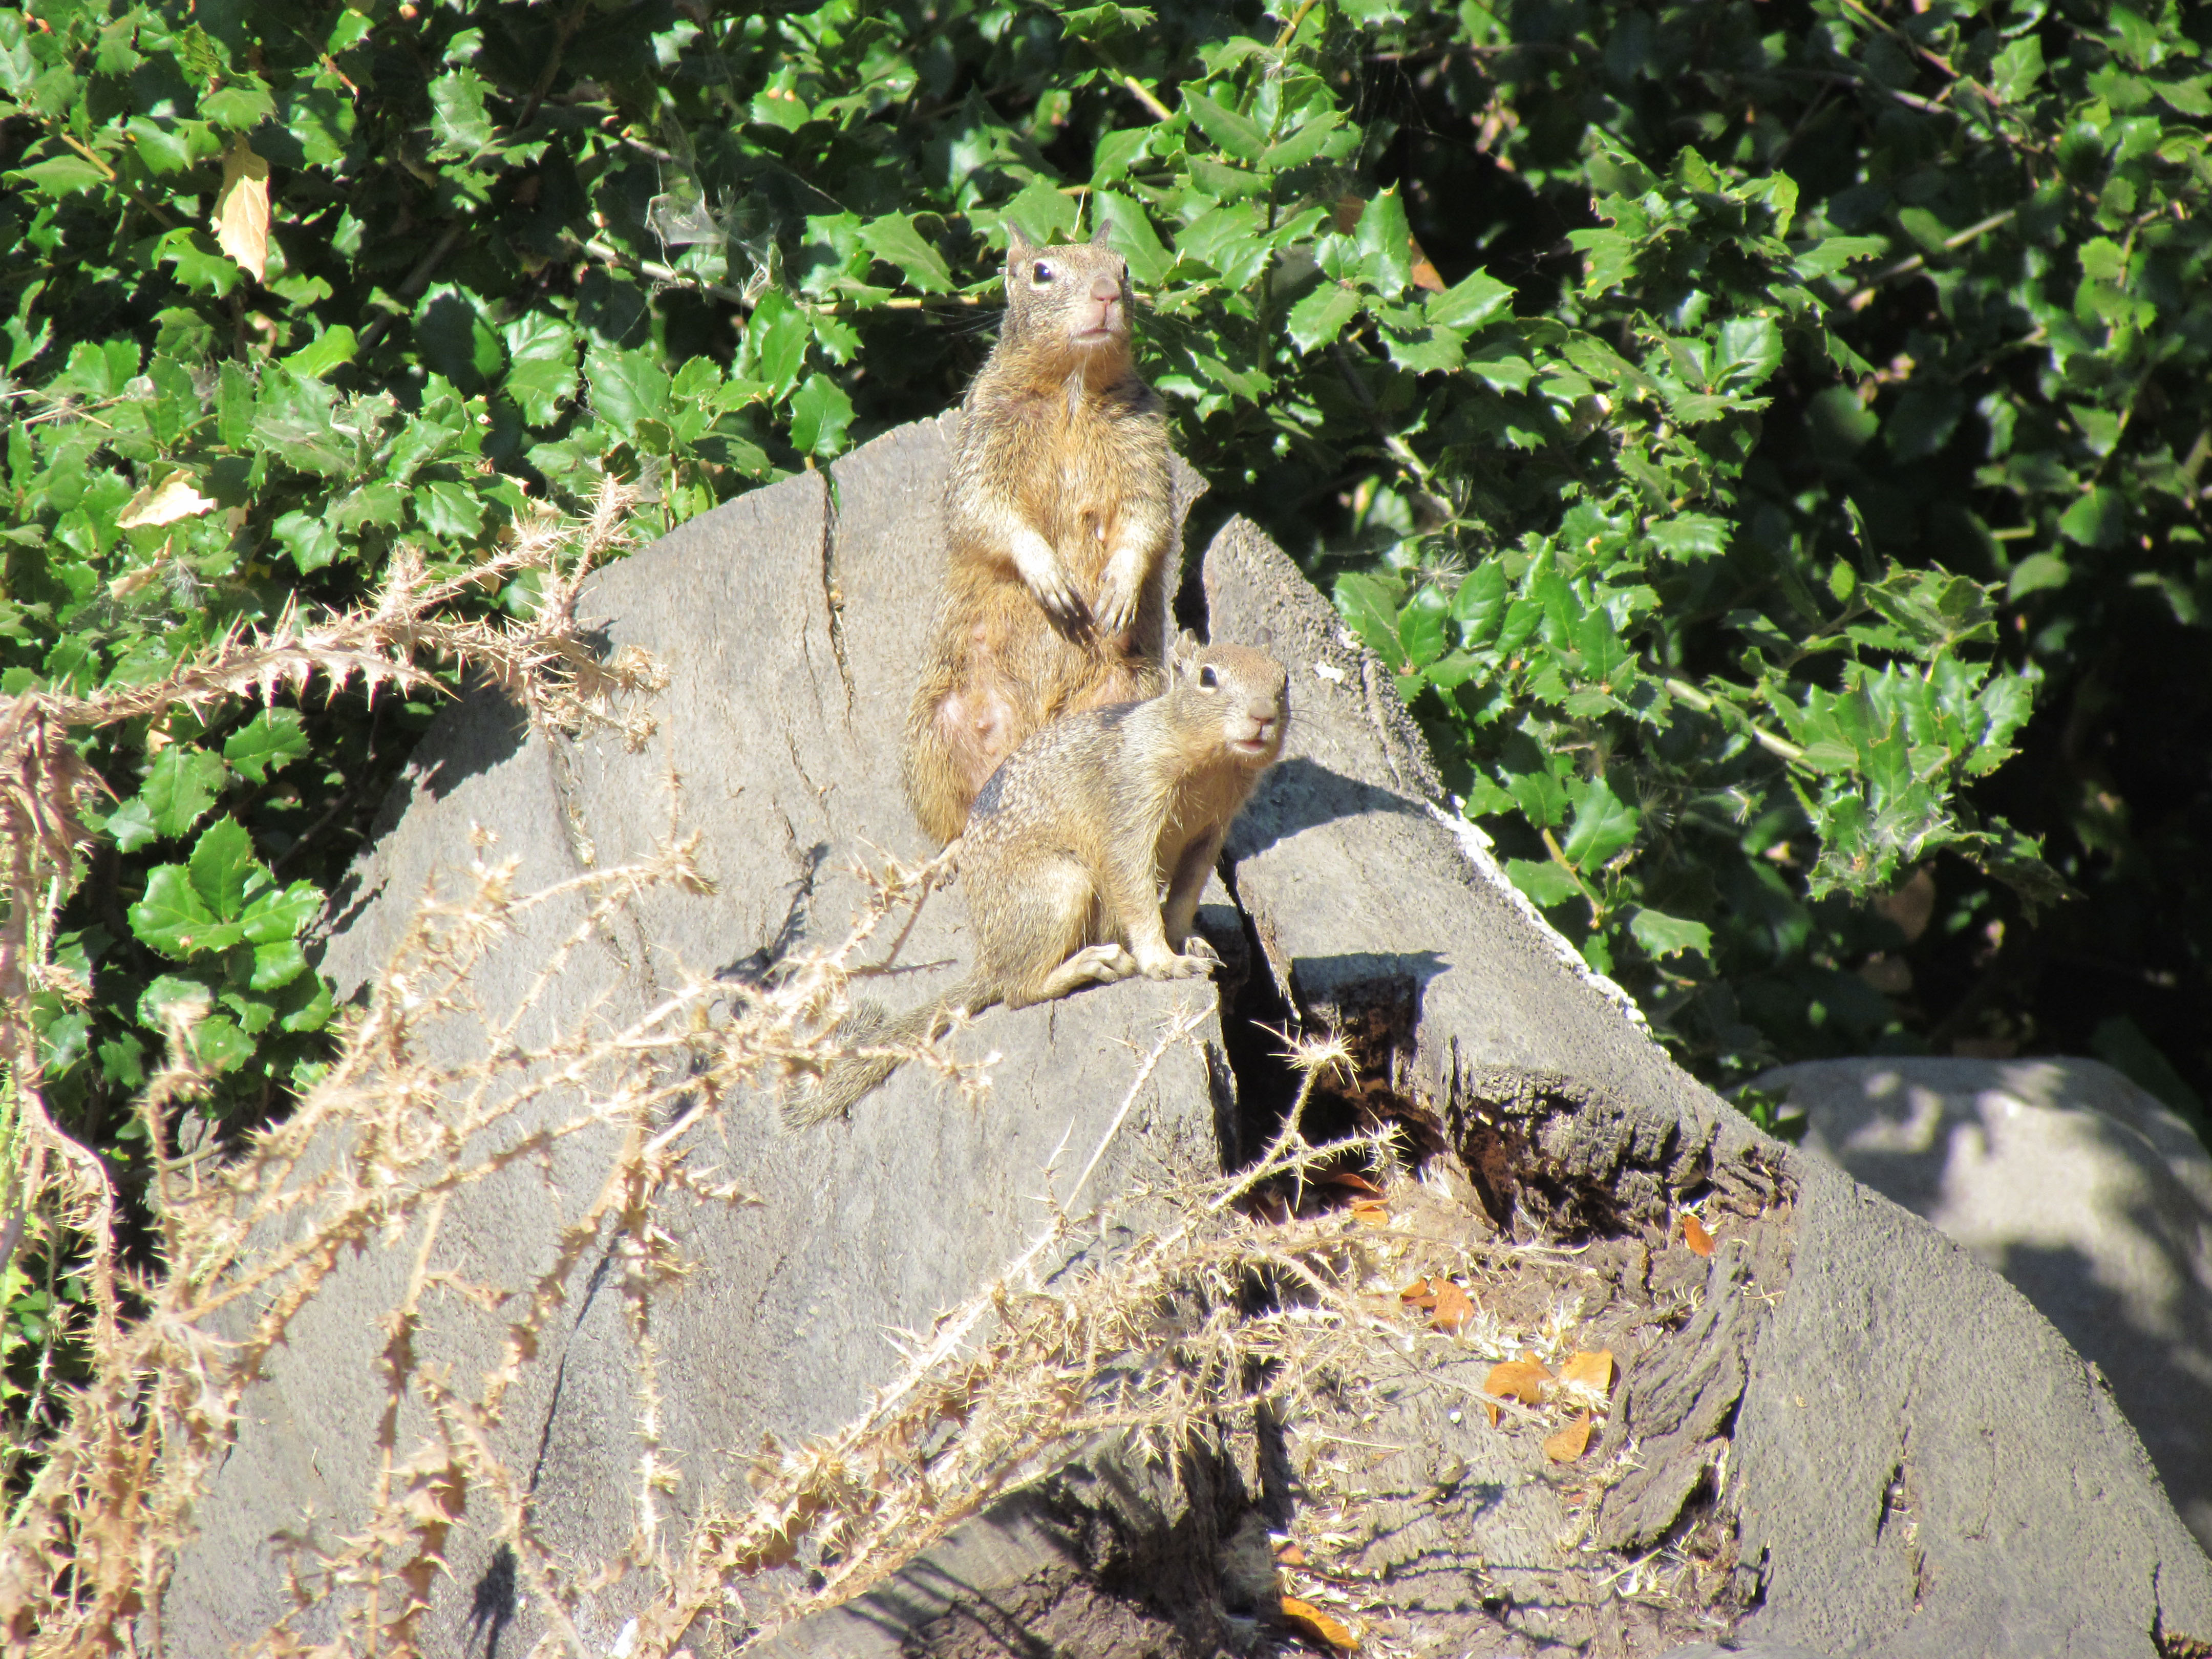 Adult and juvenile California ground squirrels near burrow complex